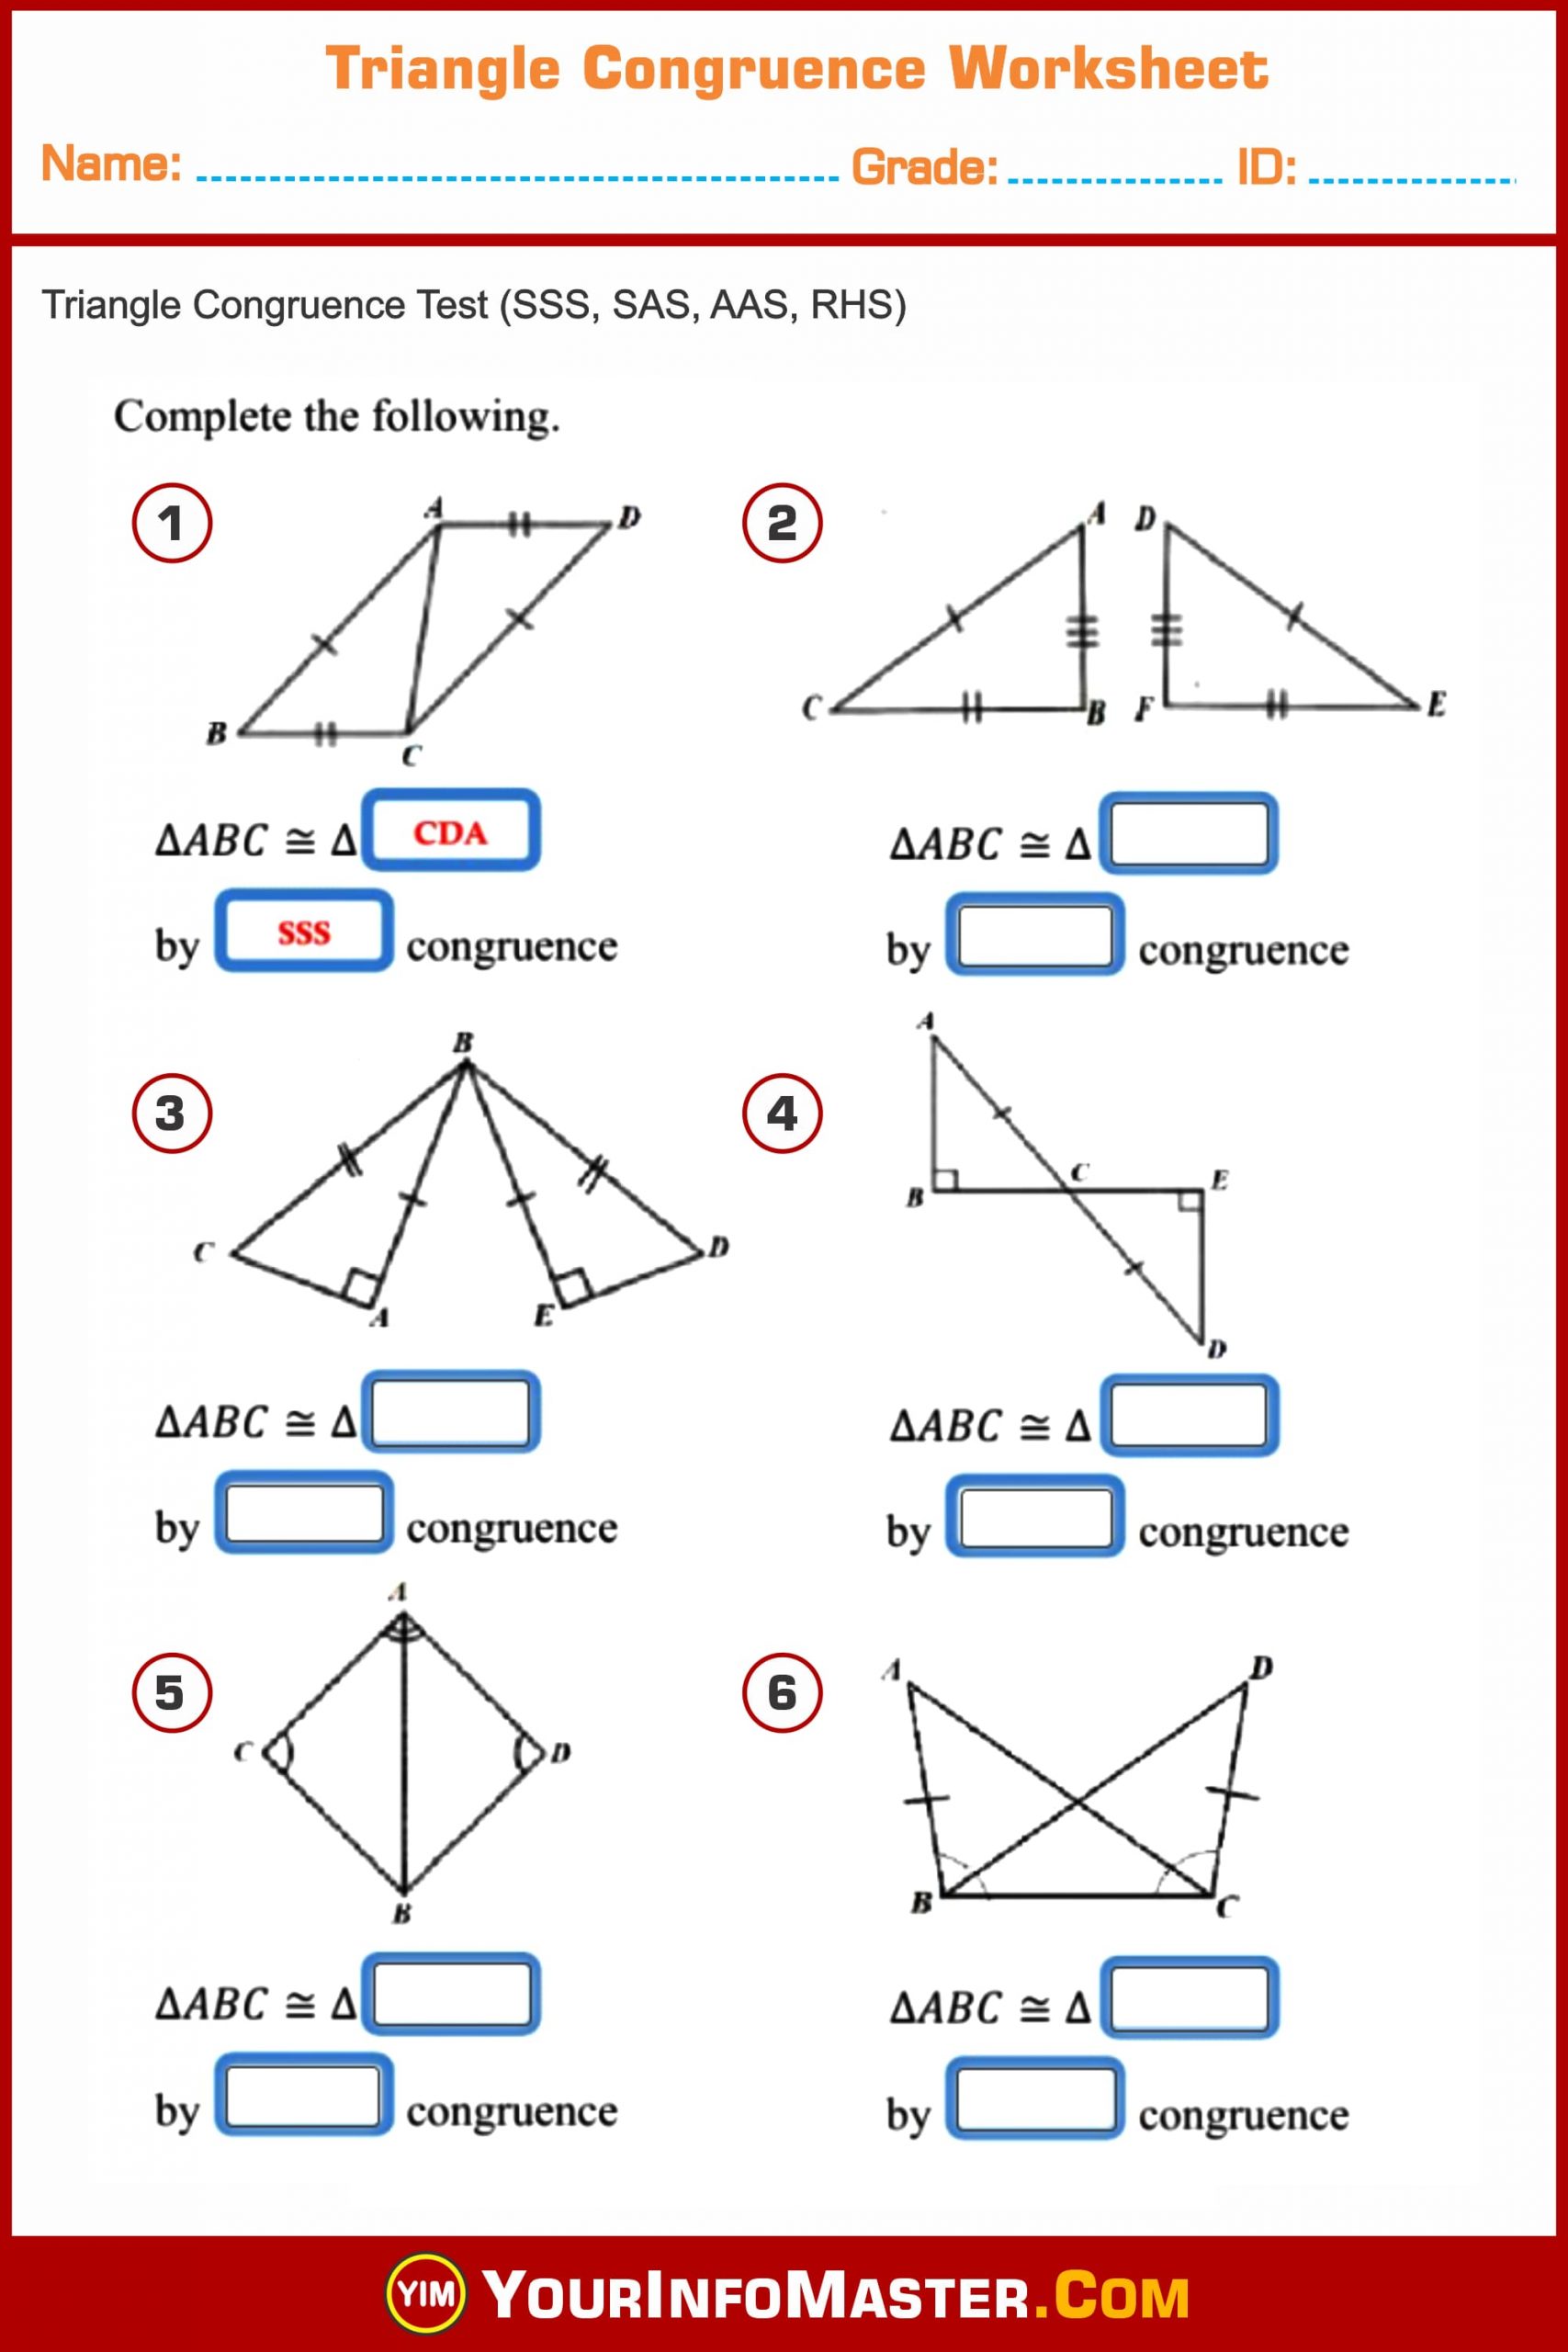 Triangle Congruence Worksheet - Your Info Master In Triangle Congruence Practice Worksheet